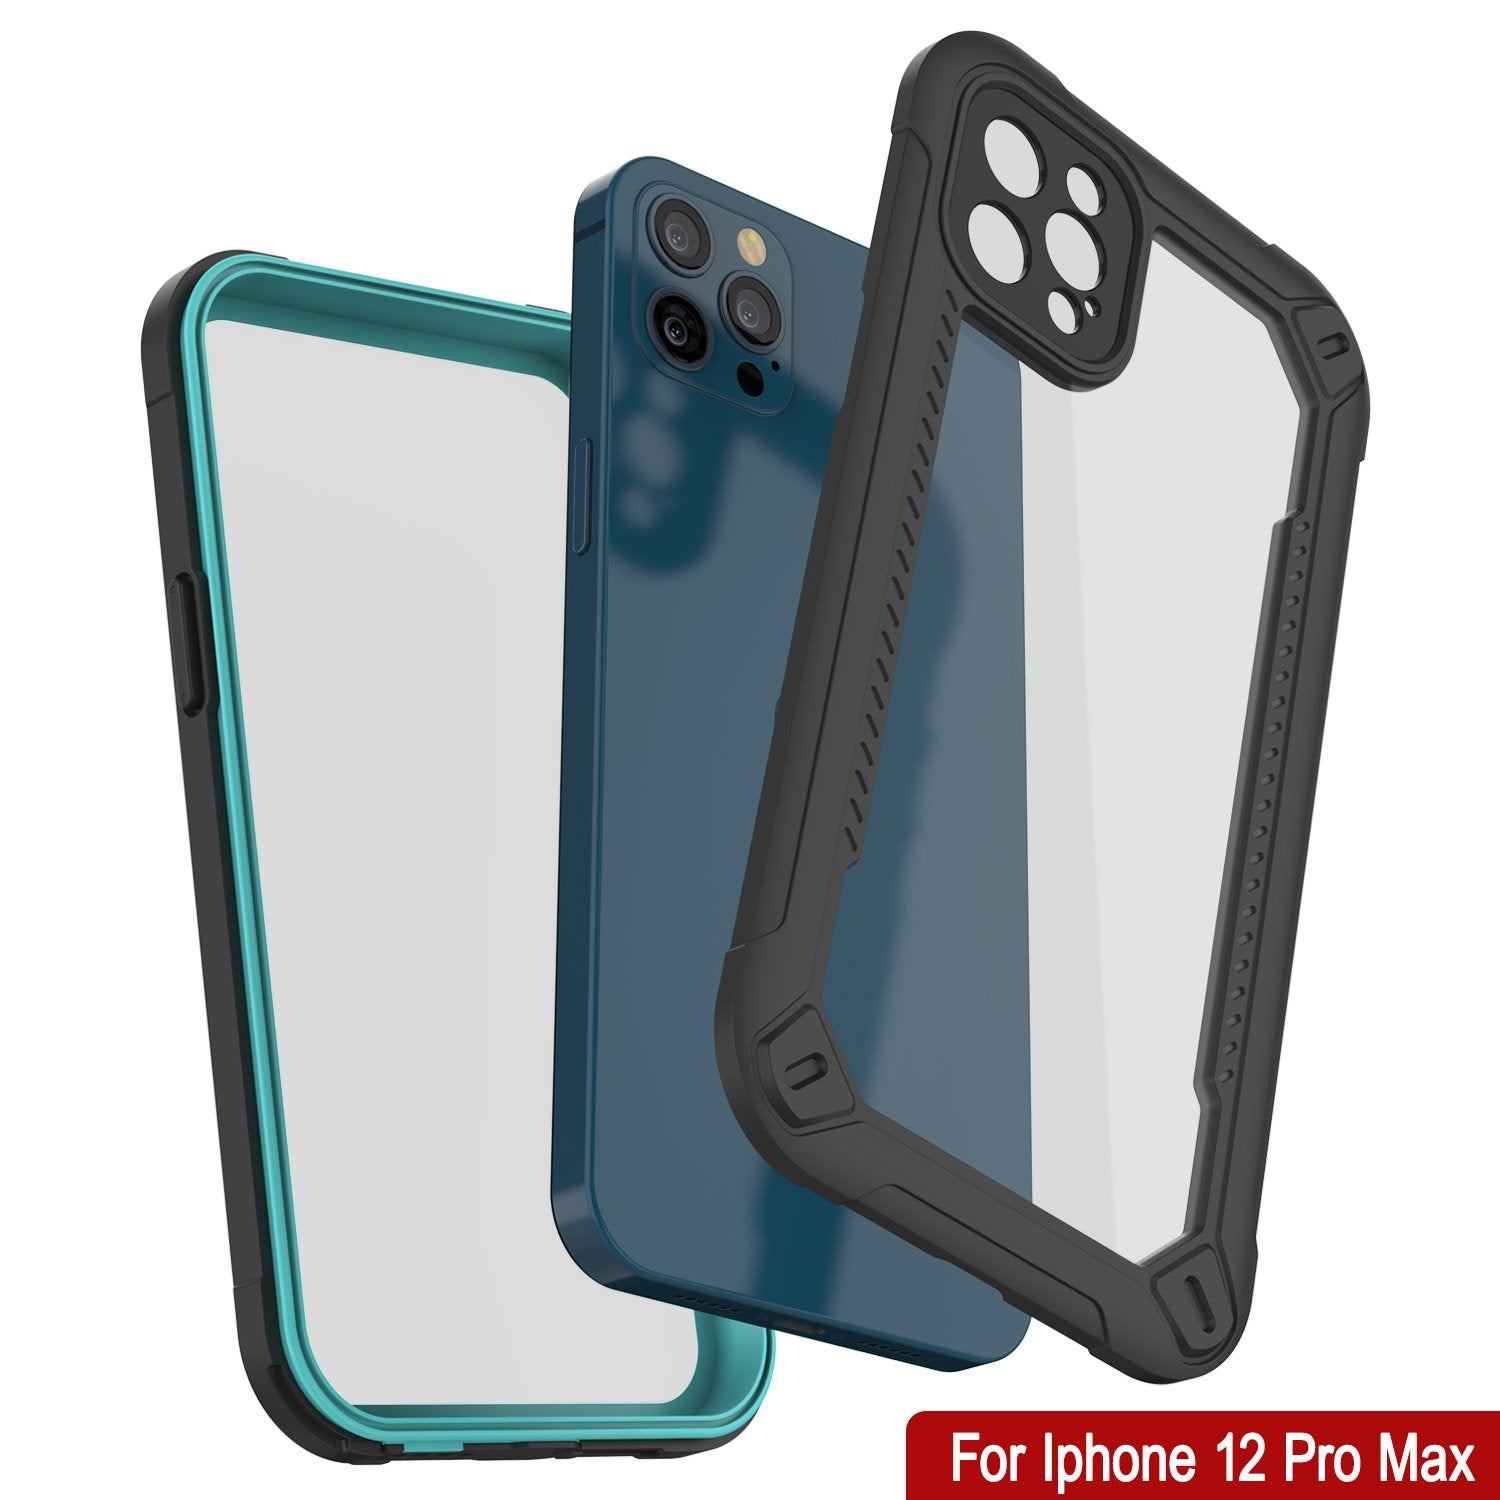 iPhone 12 Pro Max Waterproof IP68 Case, Punkcase [teal]  [Maximus Series] [Slim Fit] [IP68 Certified] [Shockresistant] Clear Armor Cover with Screen Protector | Ultimate Protection